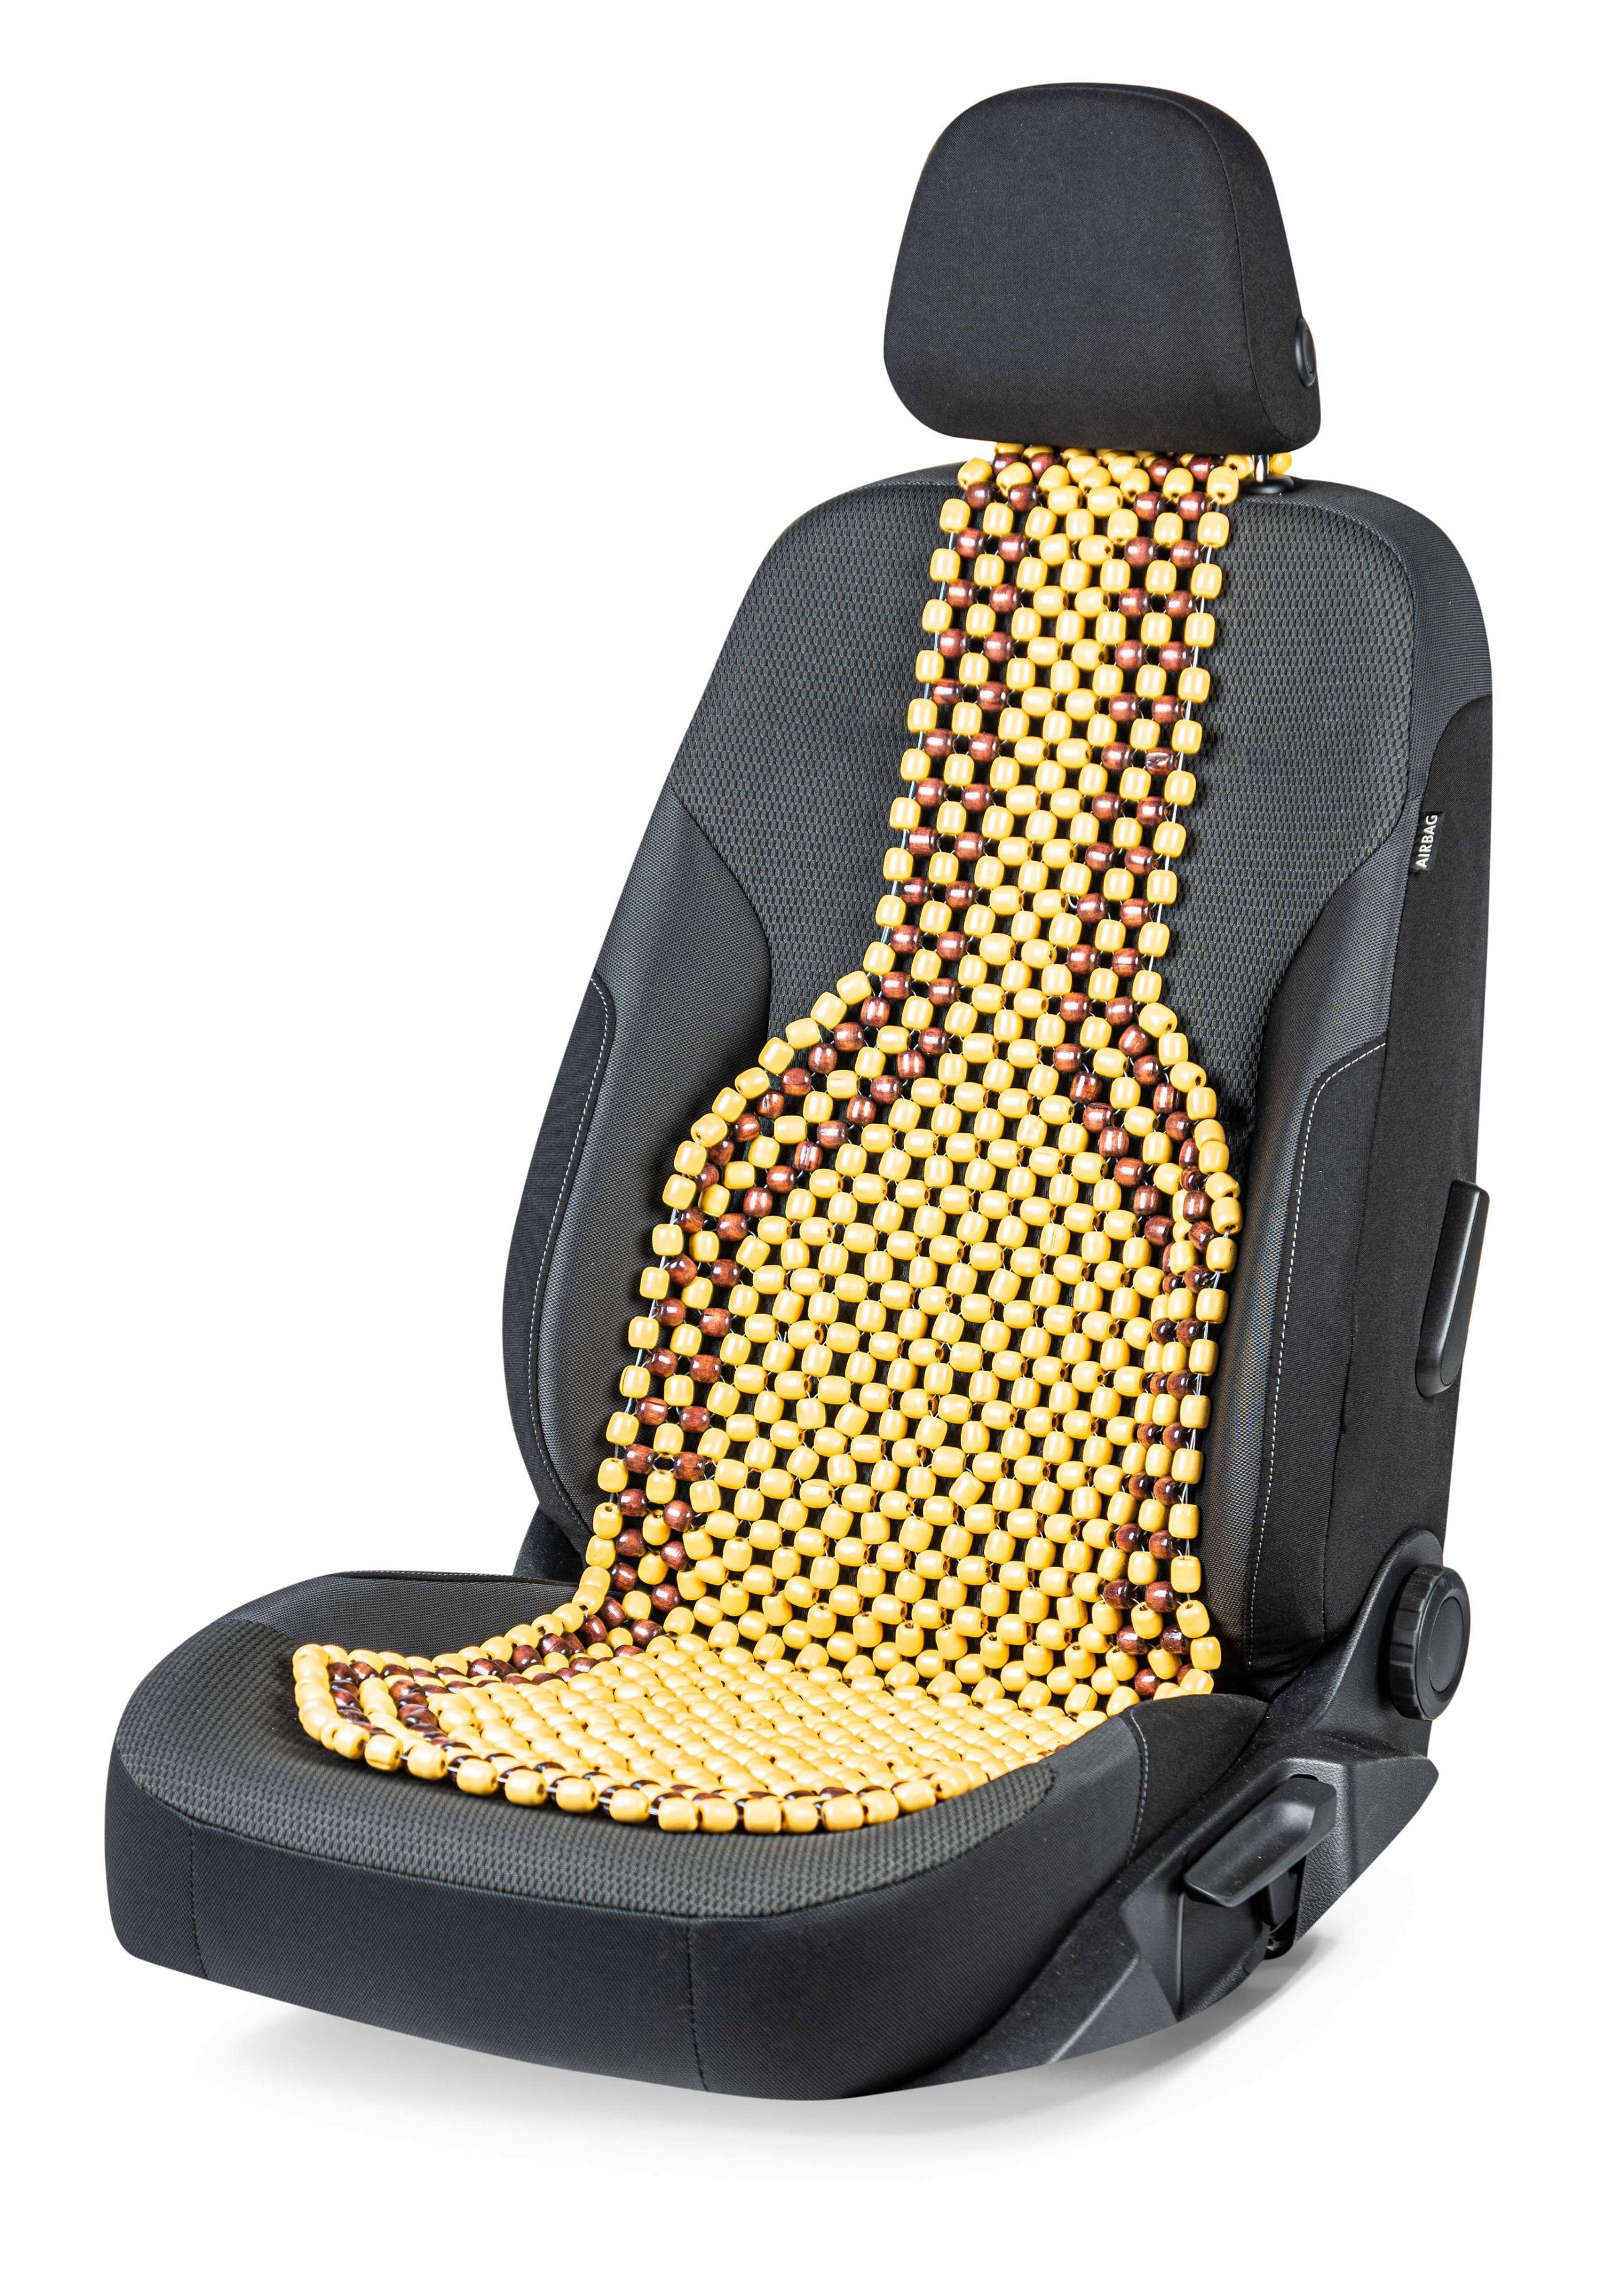 Car Seat cover made of wood beads nature